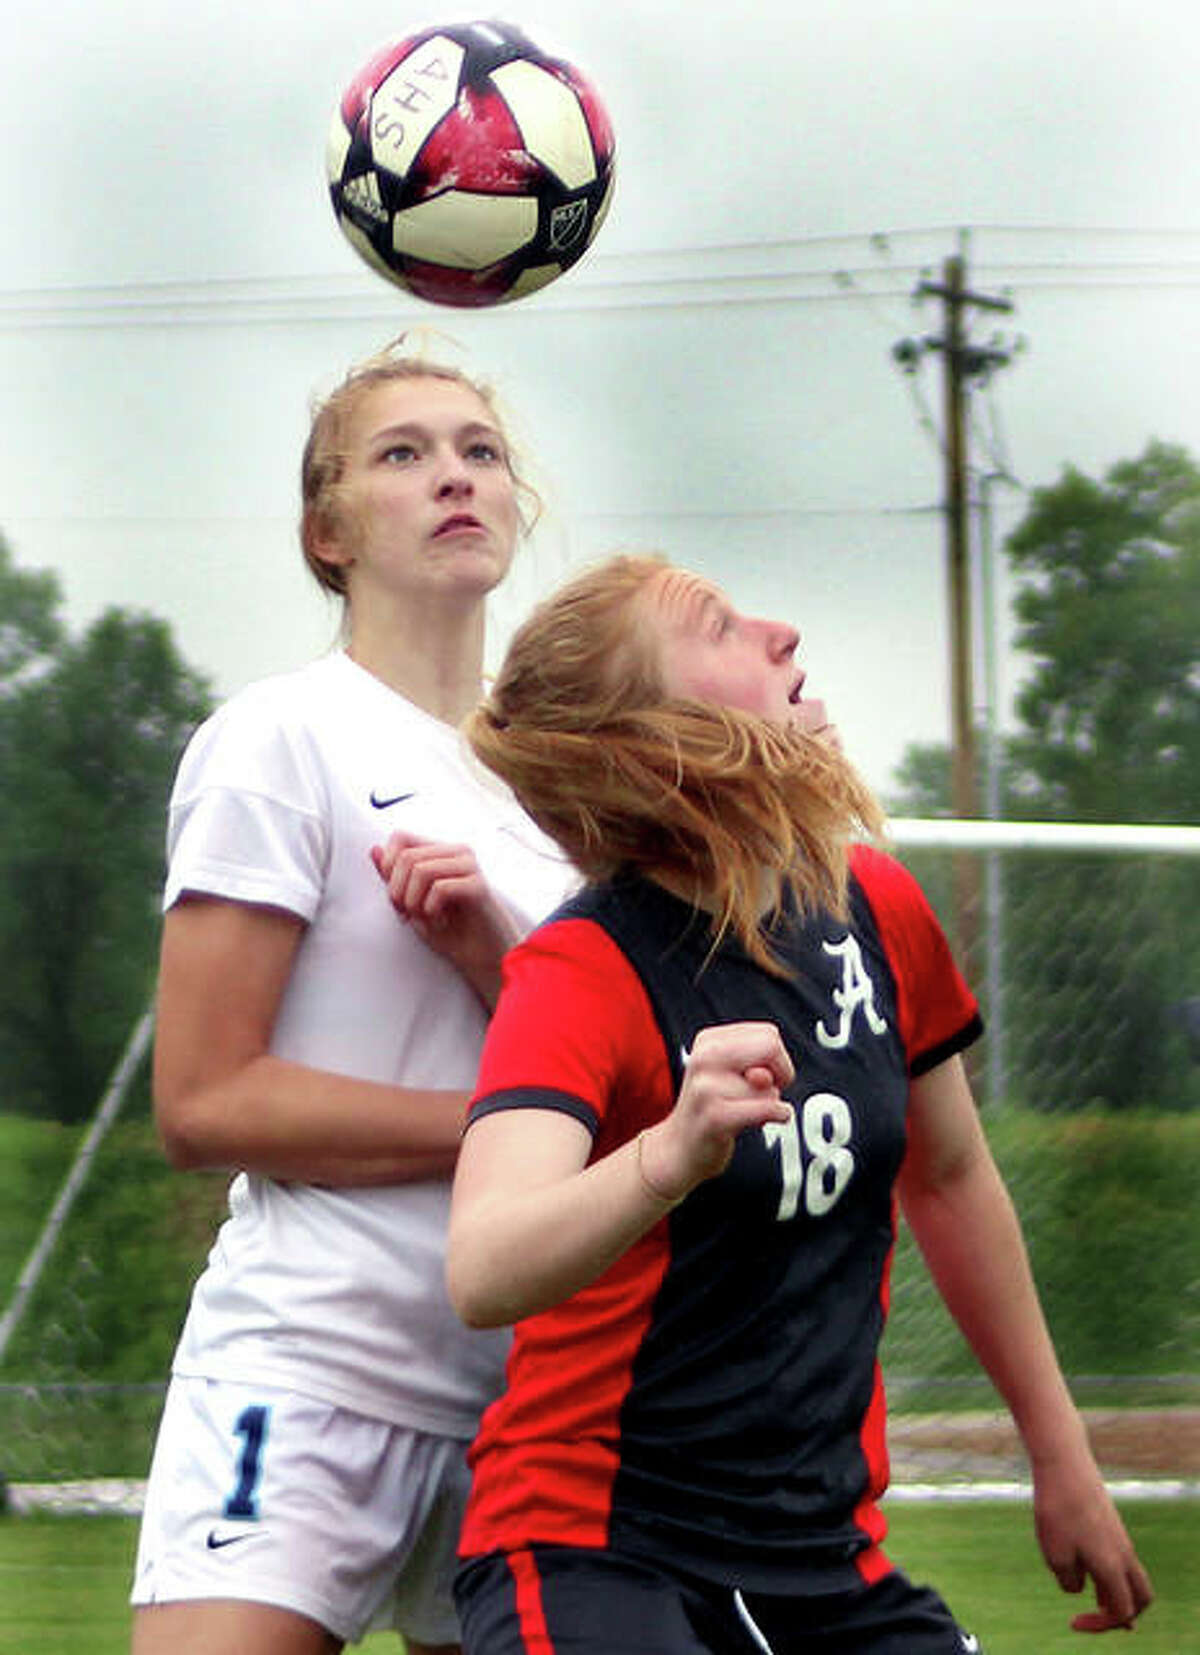 Maggie Evans of Alton (18) eyes the ball after heading it in front of Belleville East’s Abigail Kuykendall Thursday night at Alton High. The Redbirds got past East 2-1 in overtime penalty kicks.